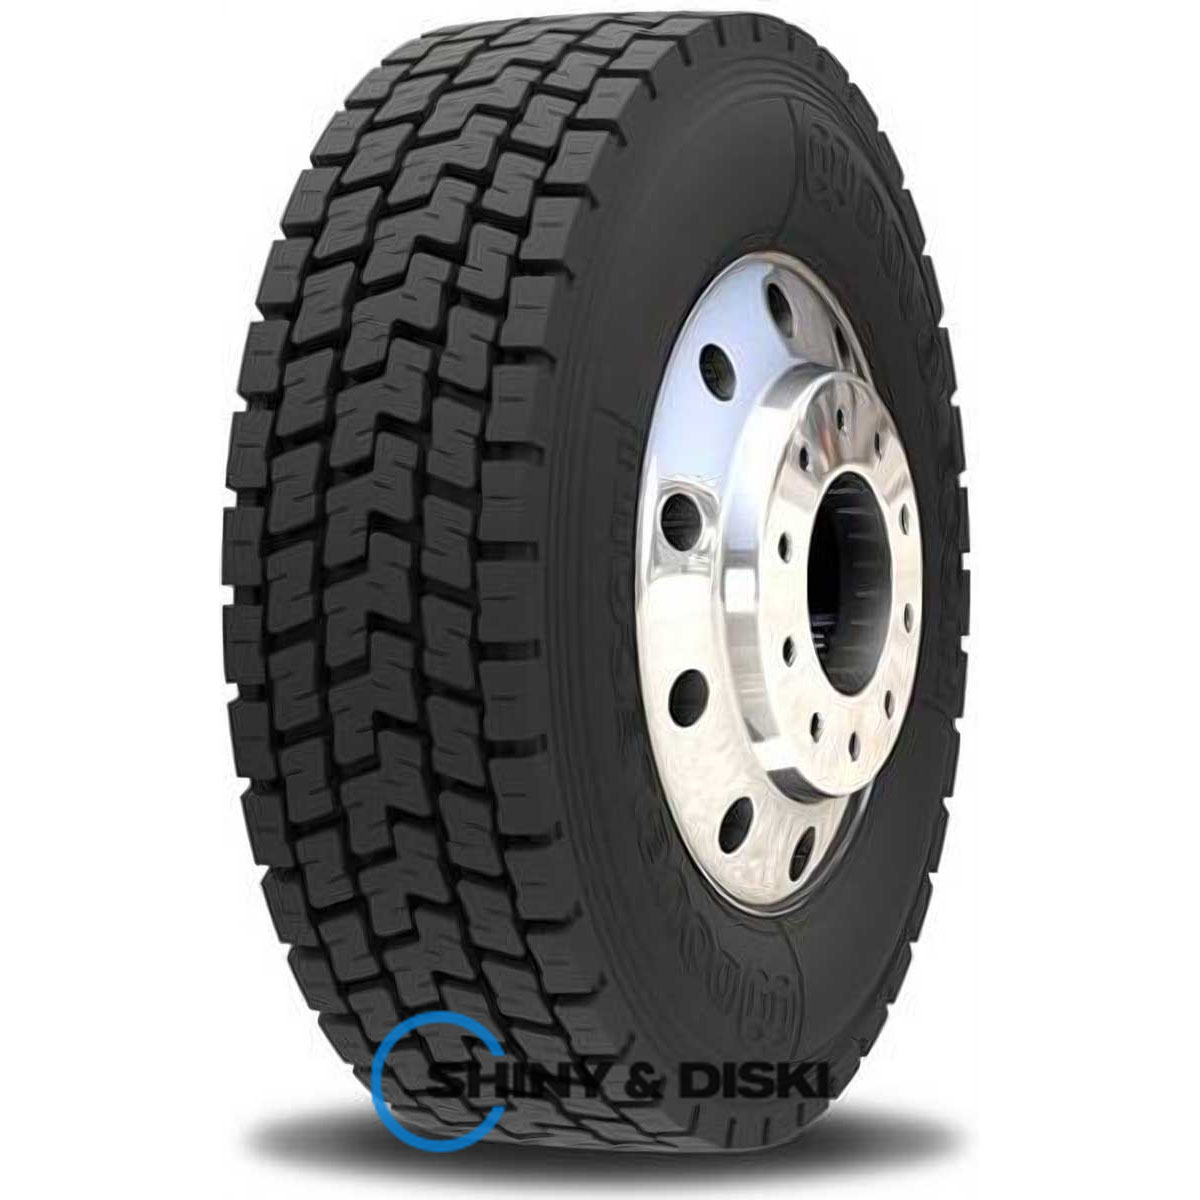 double coin rlb450 (ведущая ось) 295/80 r22.5 149/146l